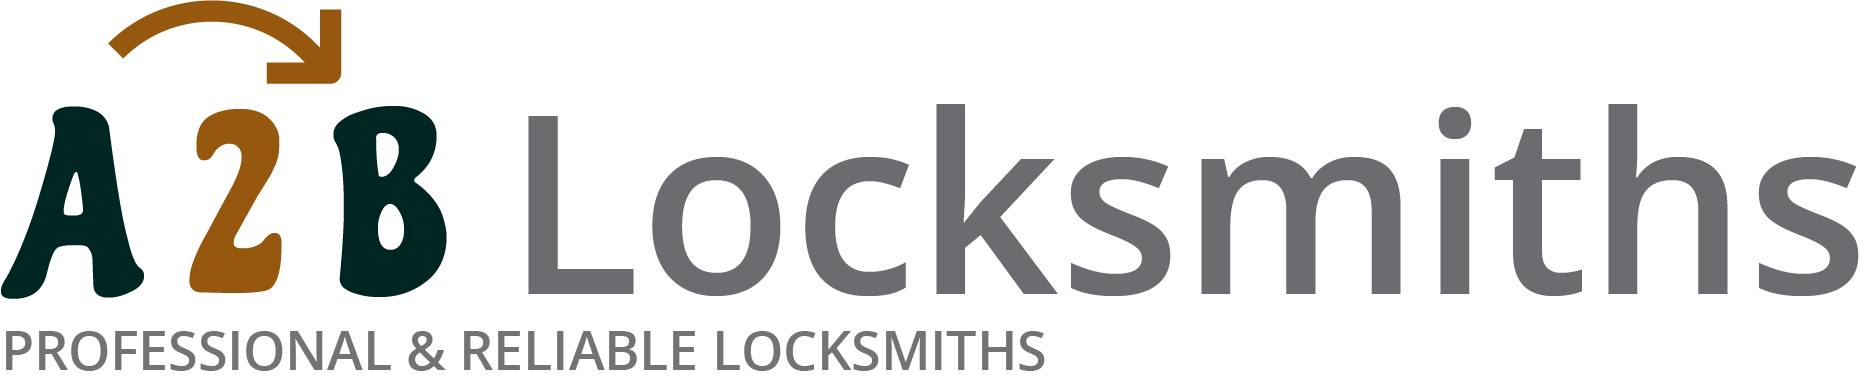 If you are locked out of house in Cubitt Town, our 24/7 local emergency locksmith services can help you.